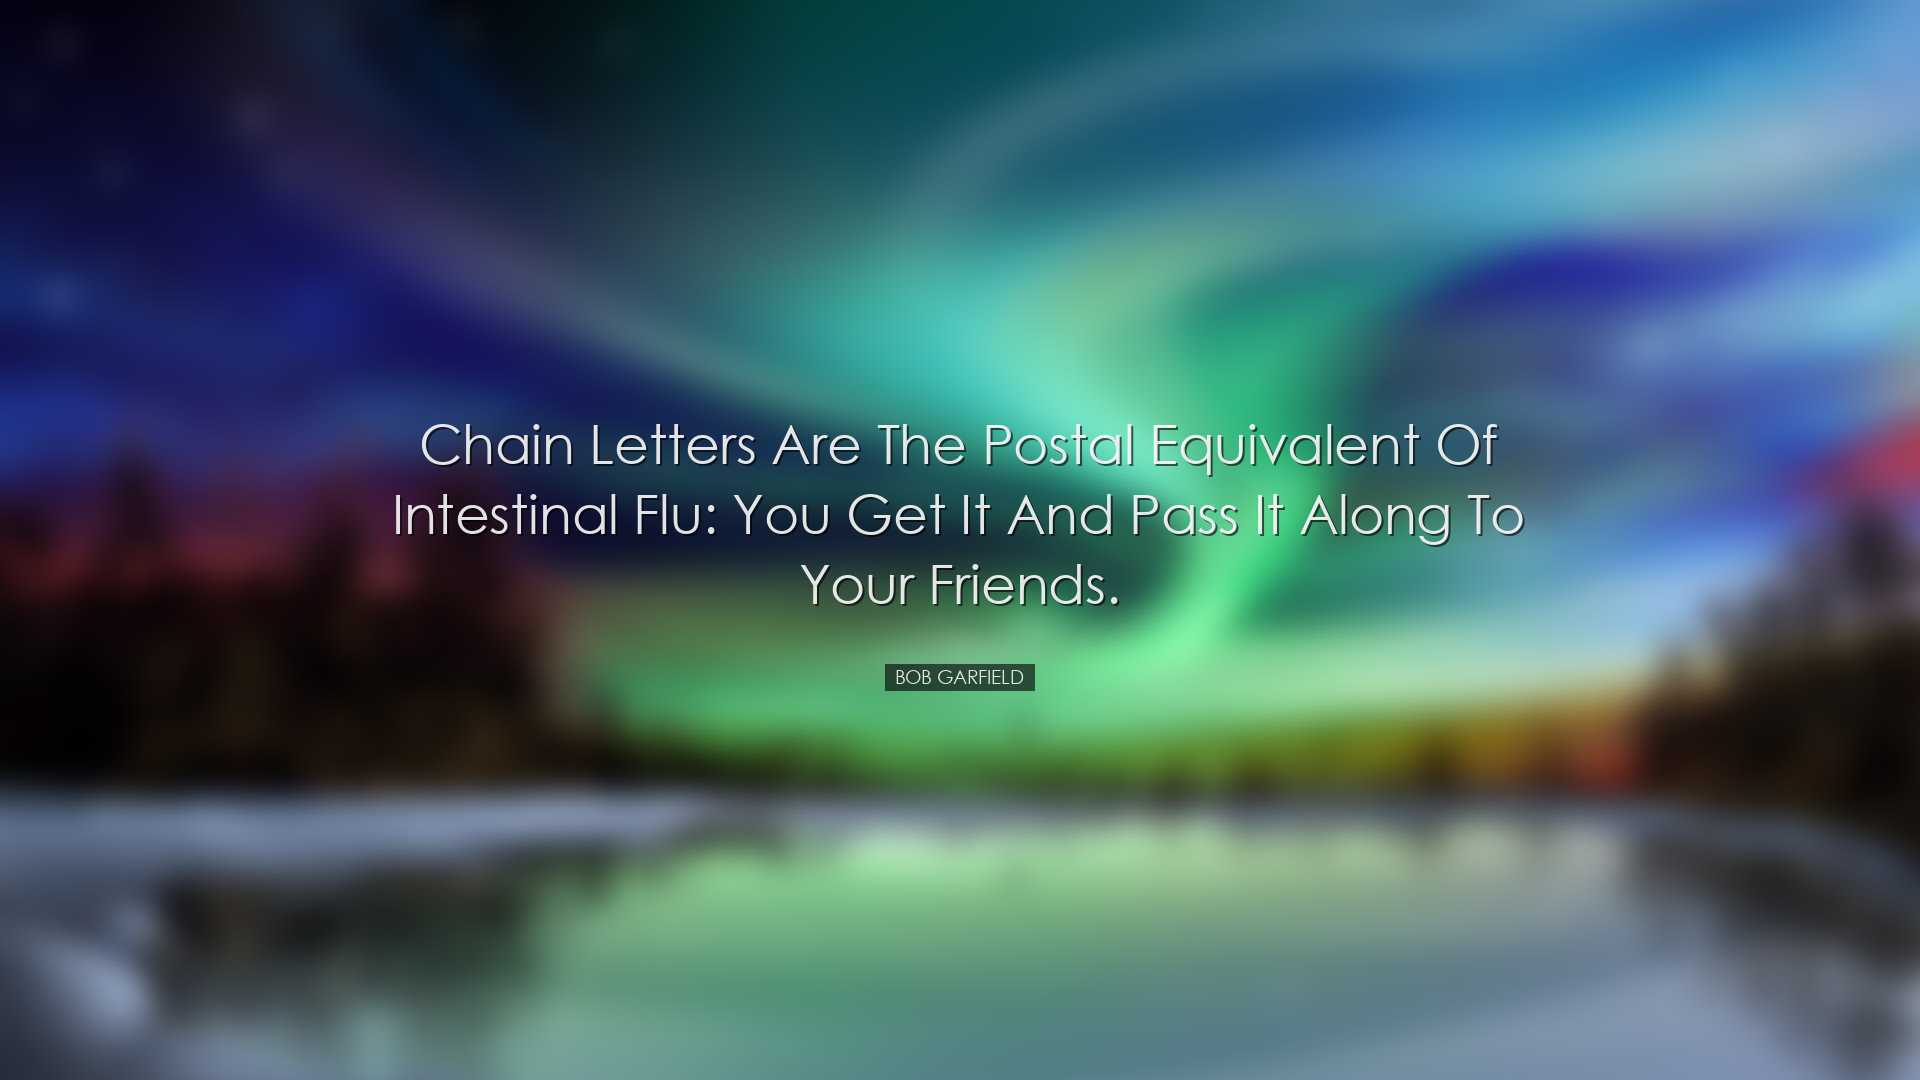 Chain letters are the postal equivalent of intestinal flu: you get